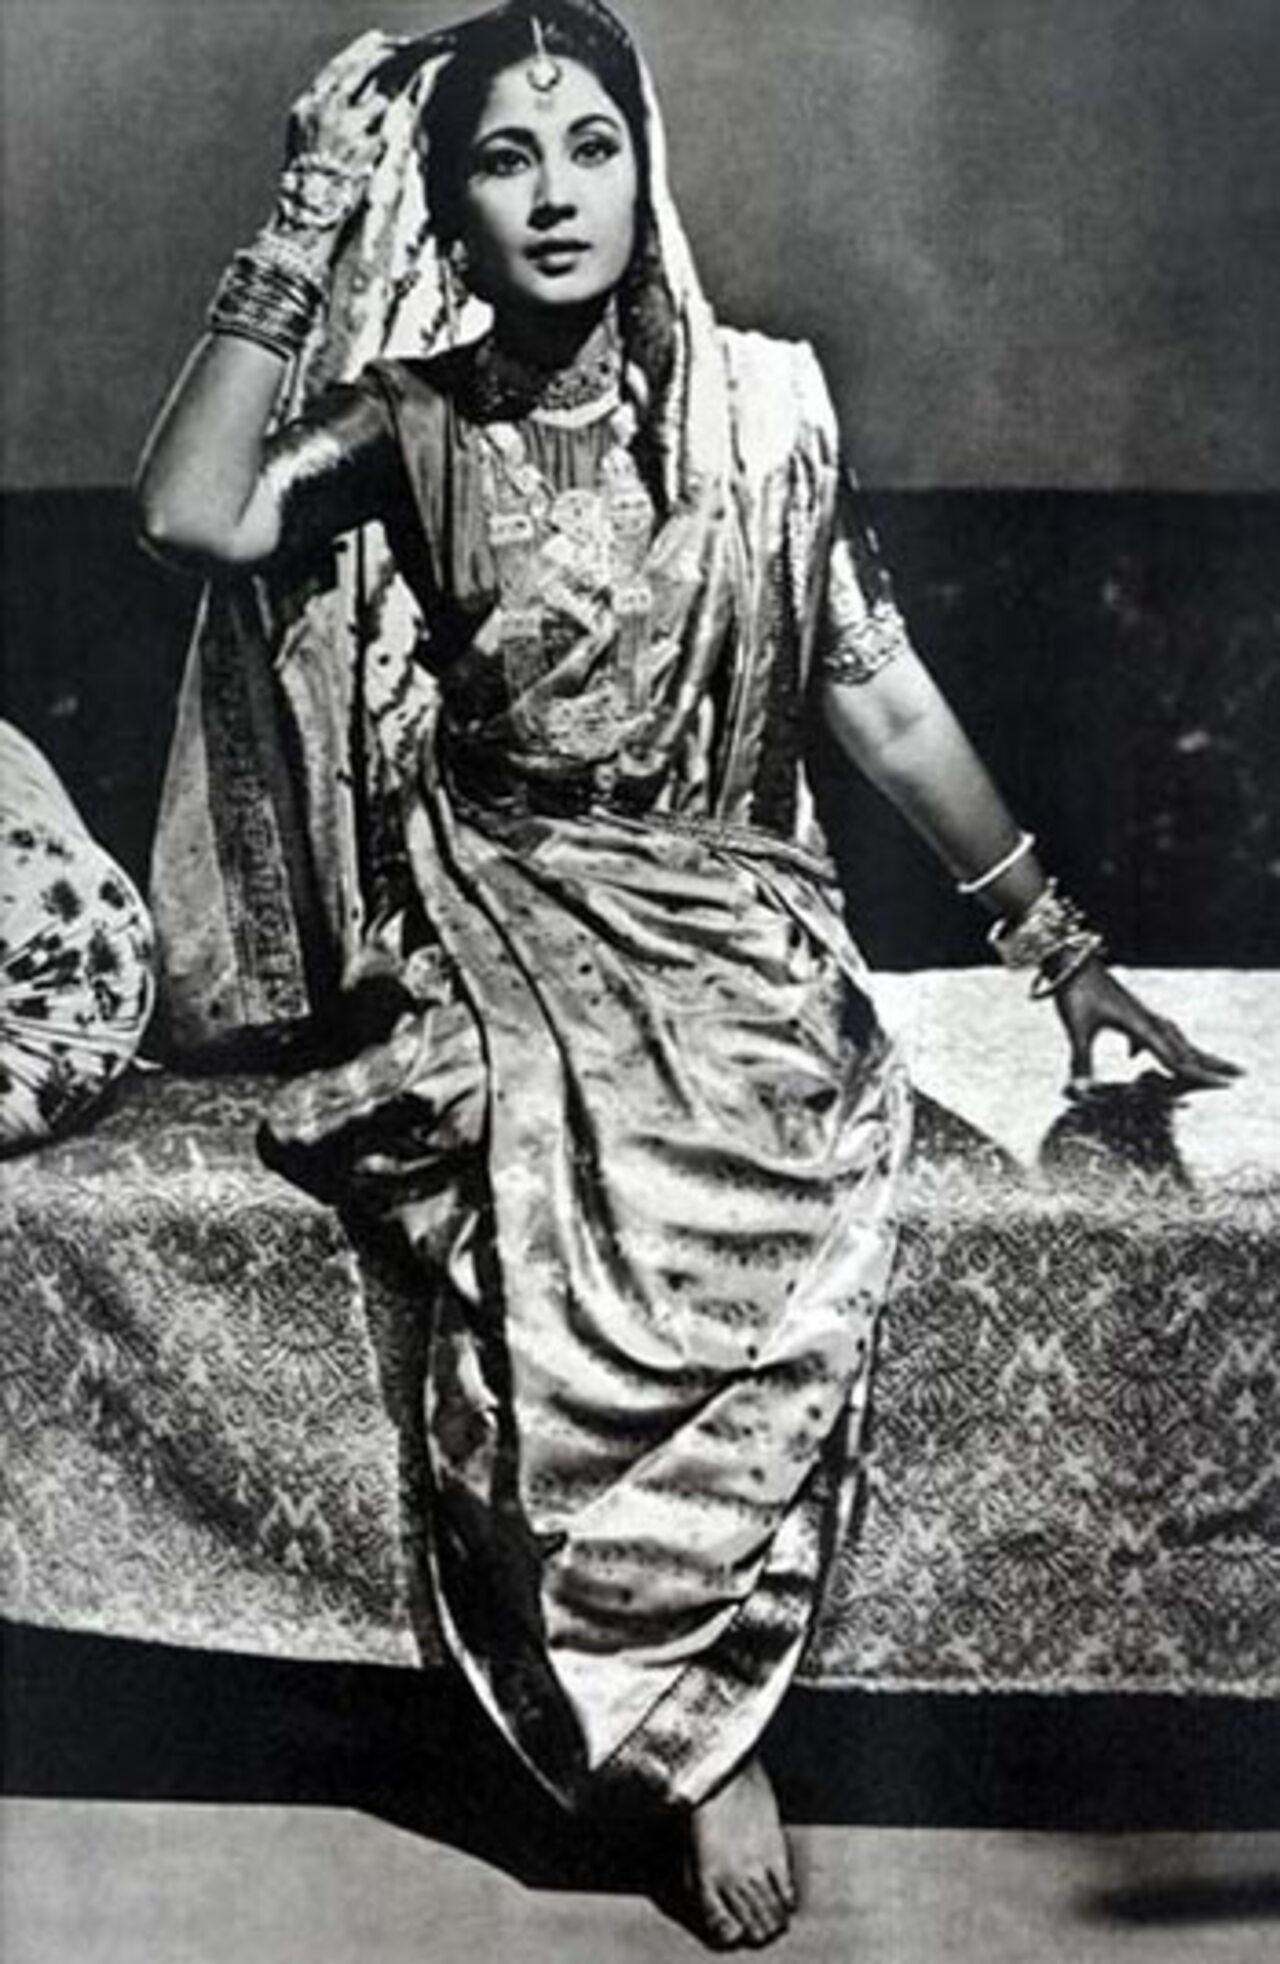 Meena Kumari in 'Saheb, Biwi Aur Ghulam'
In 'Saheb Biwi Aur Ghulam', Meena Kumari elegantly showcased the timeless allure of rich silk sarees, reinforcing their enduring place in fashion.